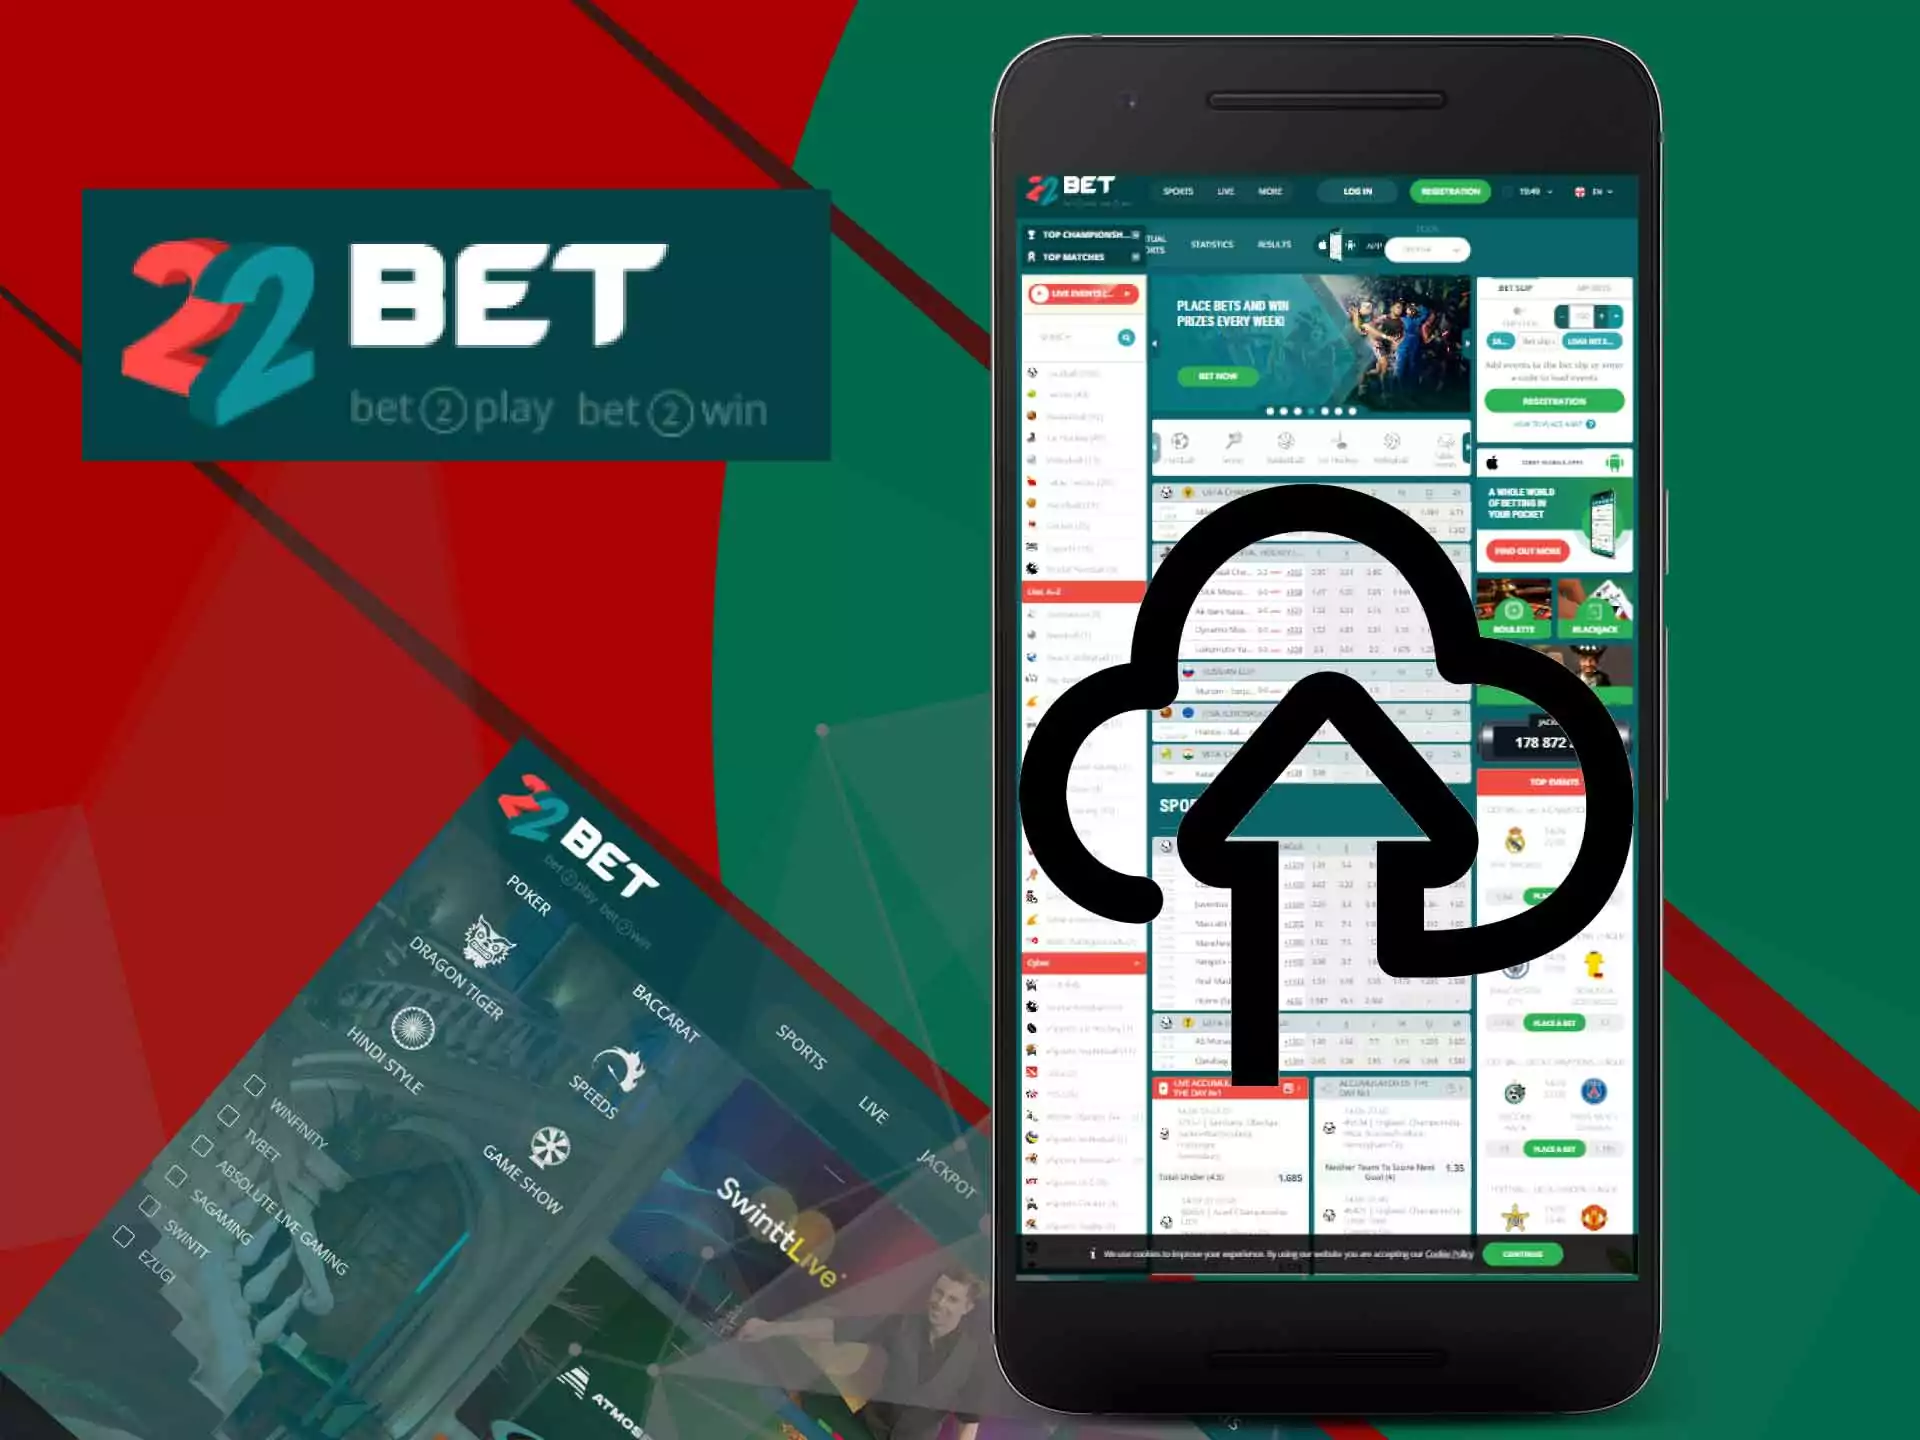 The 22Bet app updates automatically and don/t need your attention.